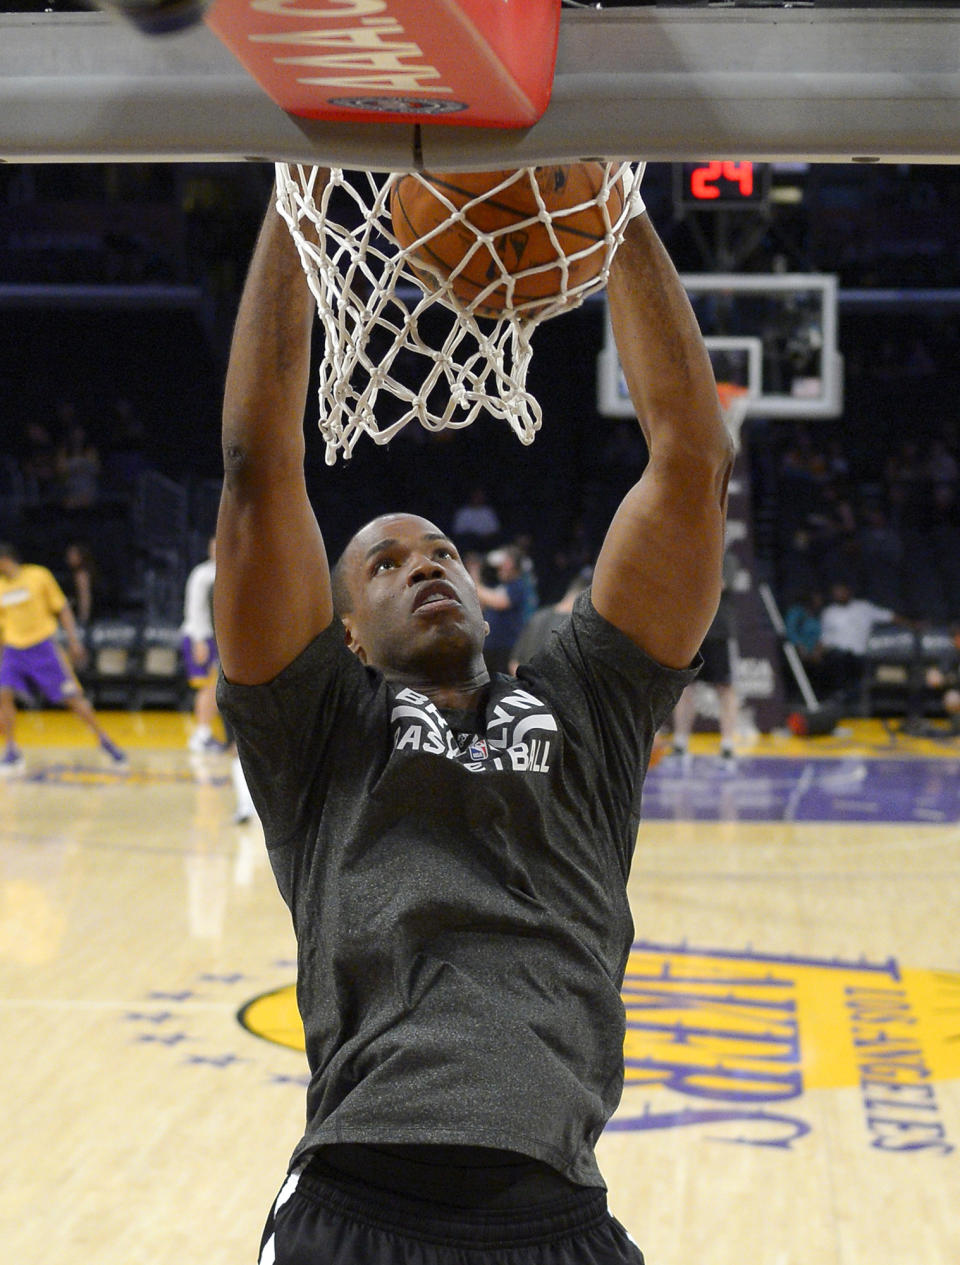 Brooklyn Nets center Jason Collins warms up prior to an NBA basketball game against the Los Angeles Lakers, Sunday, Feb. 23, 2014, in Los Angeles. Collins is set to become the NBA's first active openly gay player. He signed a 10-day contract with the Brooklyn Nets earlier Sunday and was to be in uniform for their game in Los Angeles against the Lakers. The 35-year-old center revealed at the end of last season he is gay, but he was a free agent and had remained unsigned. (AP Photo/Mark J. Terrill)